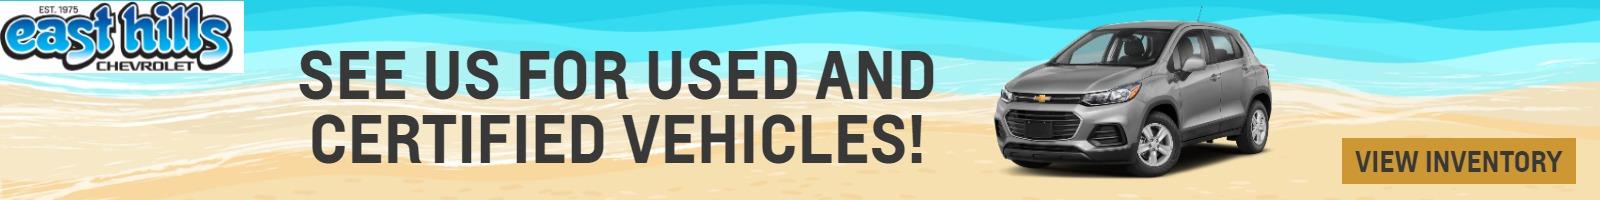 See us for used and certified vehicles!